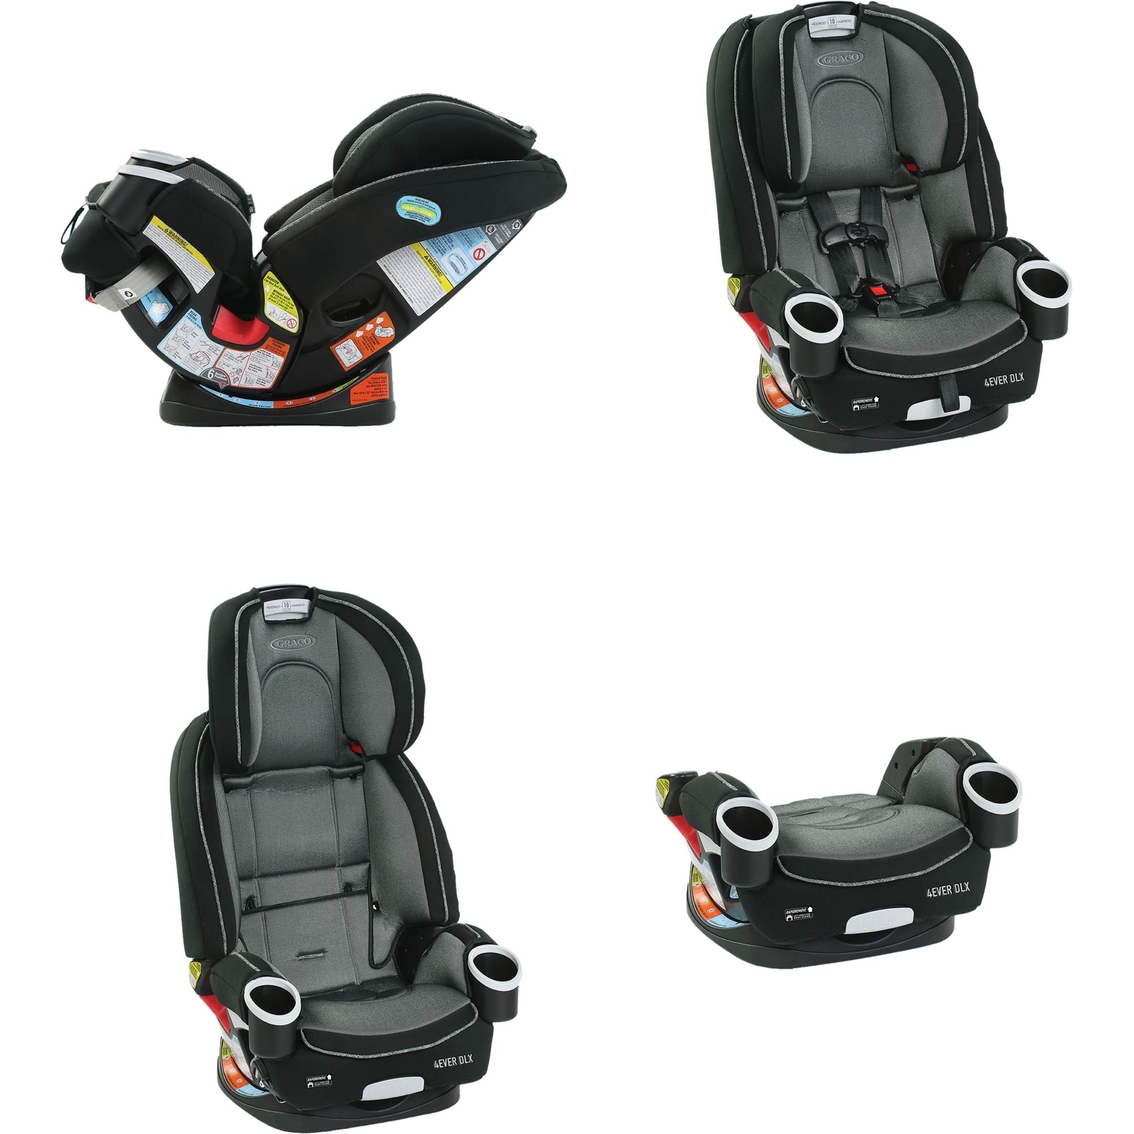 Graco 4Ever DLX 4-in-1 Car Seat - Image 2 of 3